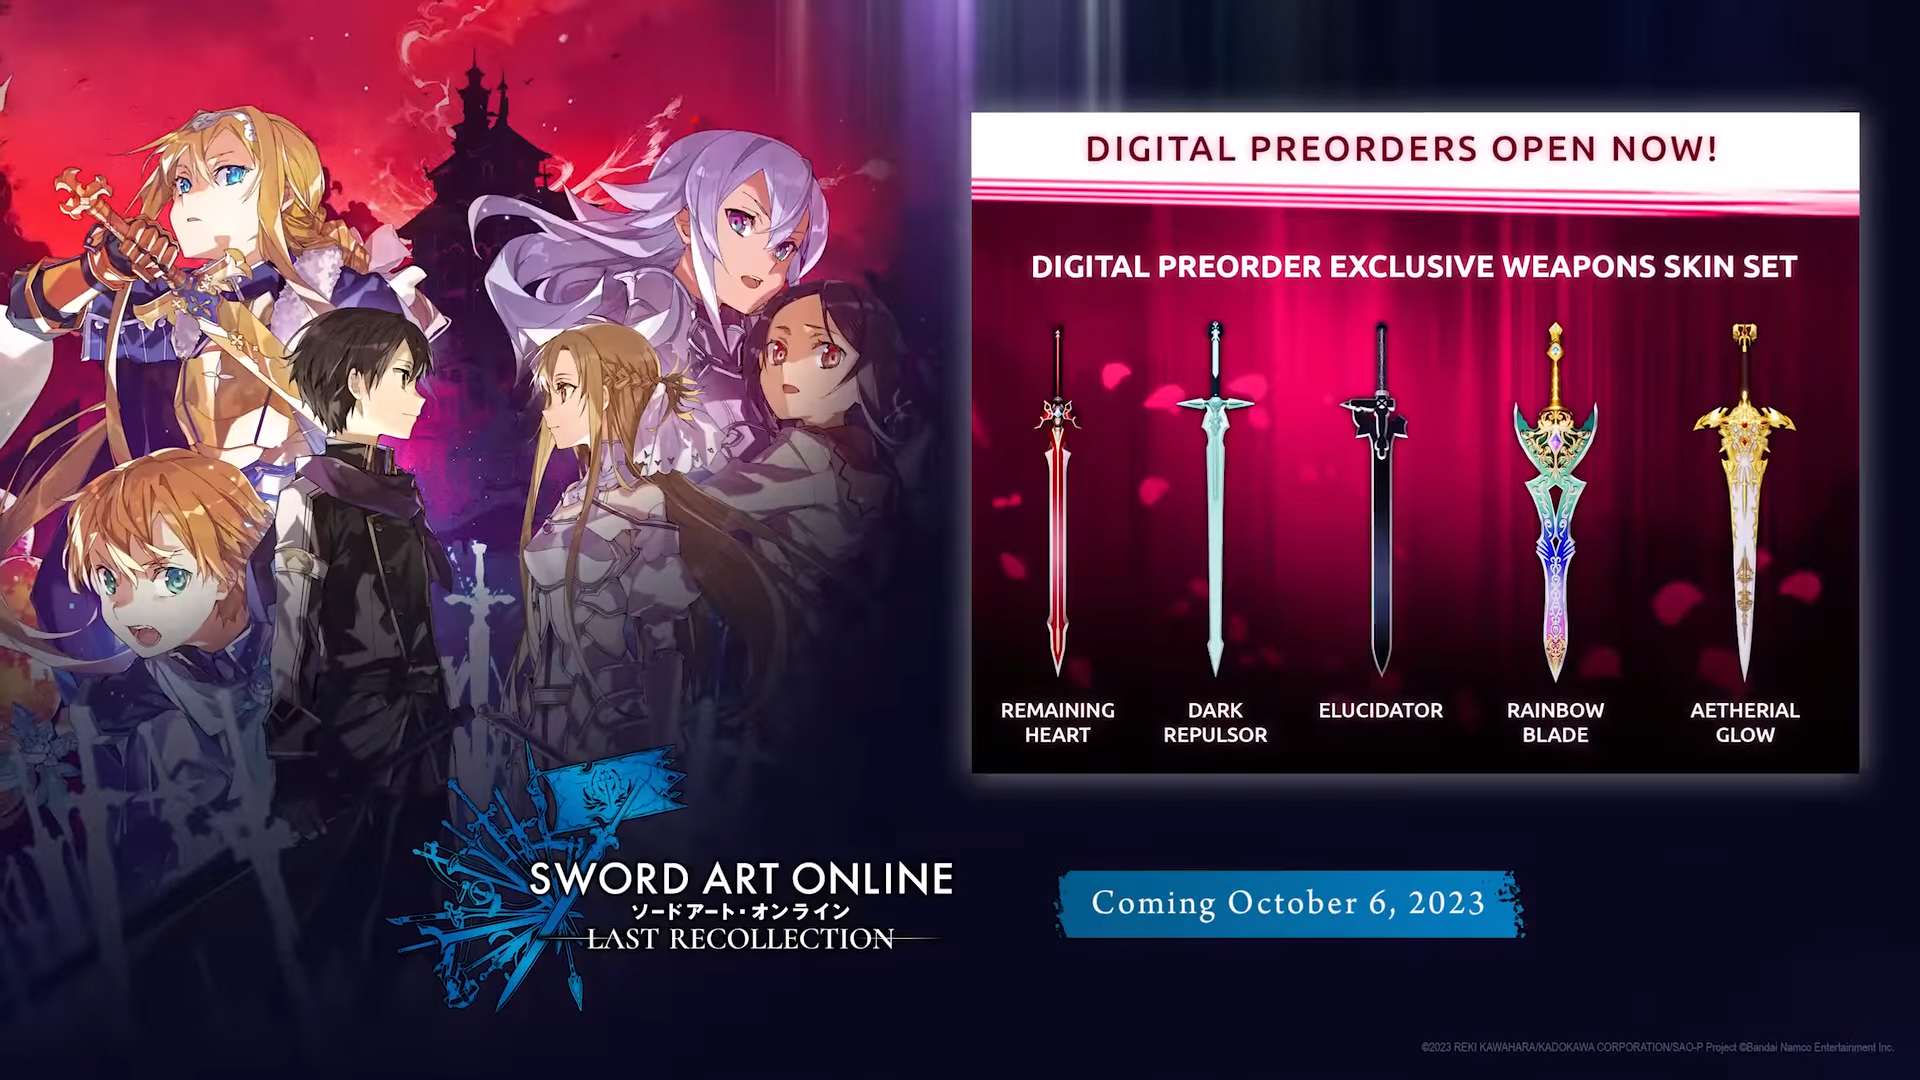 Sword Art Online: Last Recollection Game Trailer Introduces Weapon Types -  Crunchyroll News